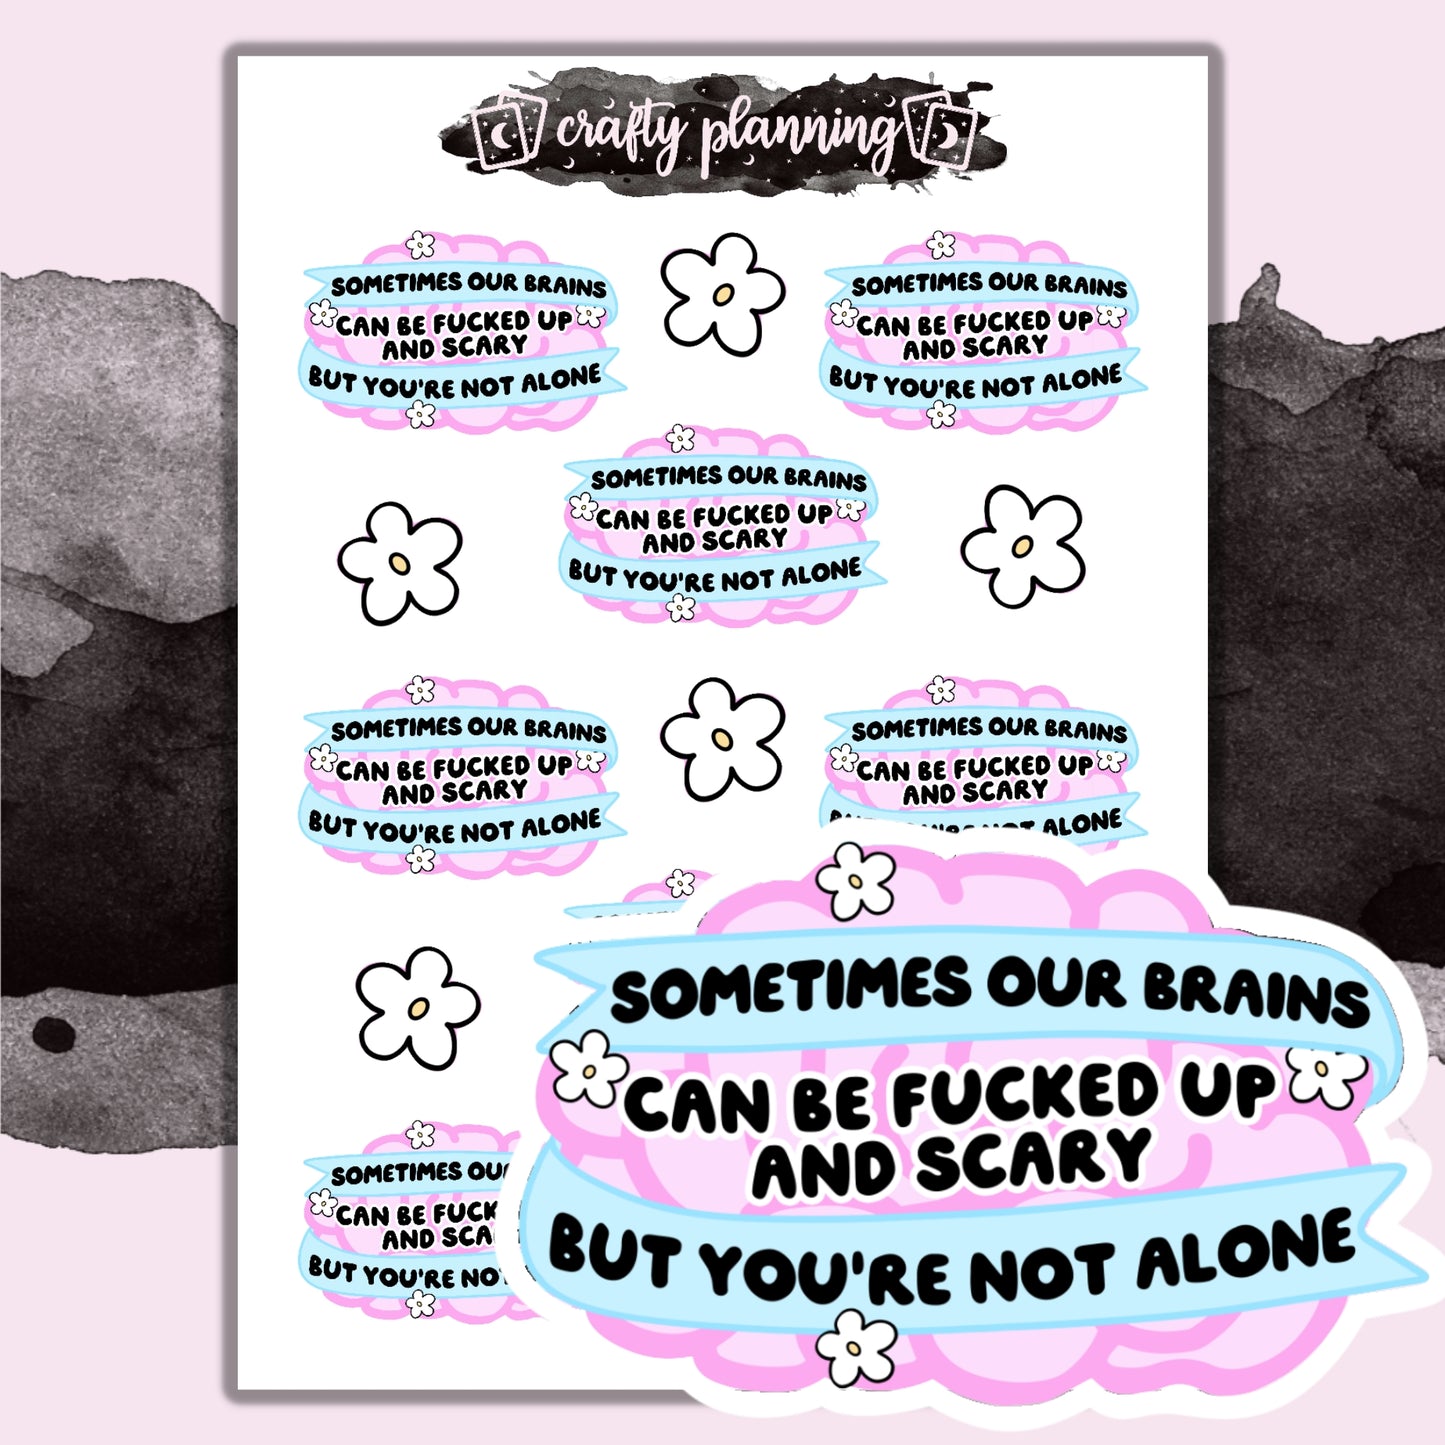 Sometimes Our Brains Can Be F*cked Up & Scary But You Are Not Alone - Mini Sticker Sheet